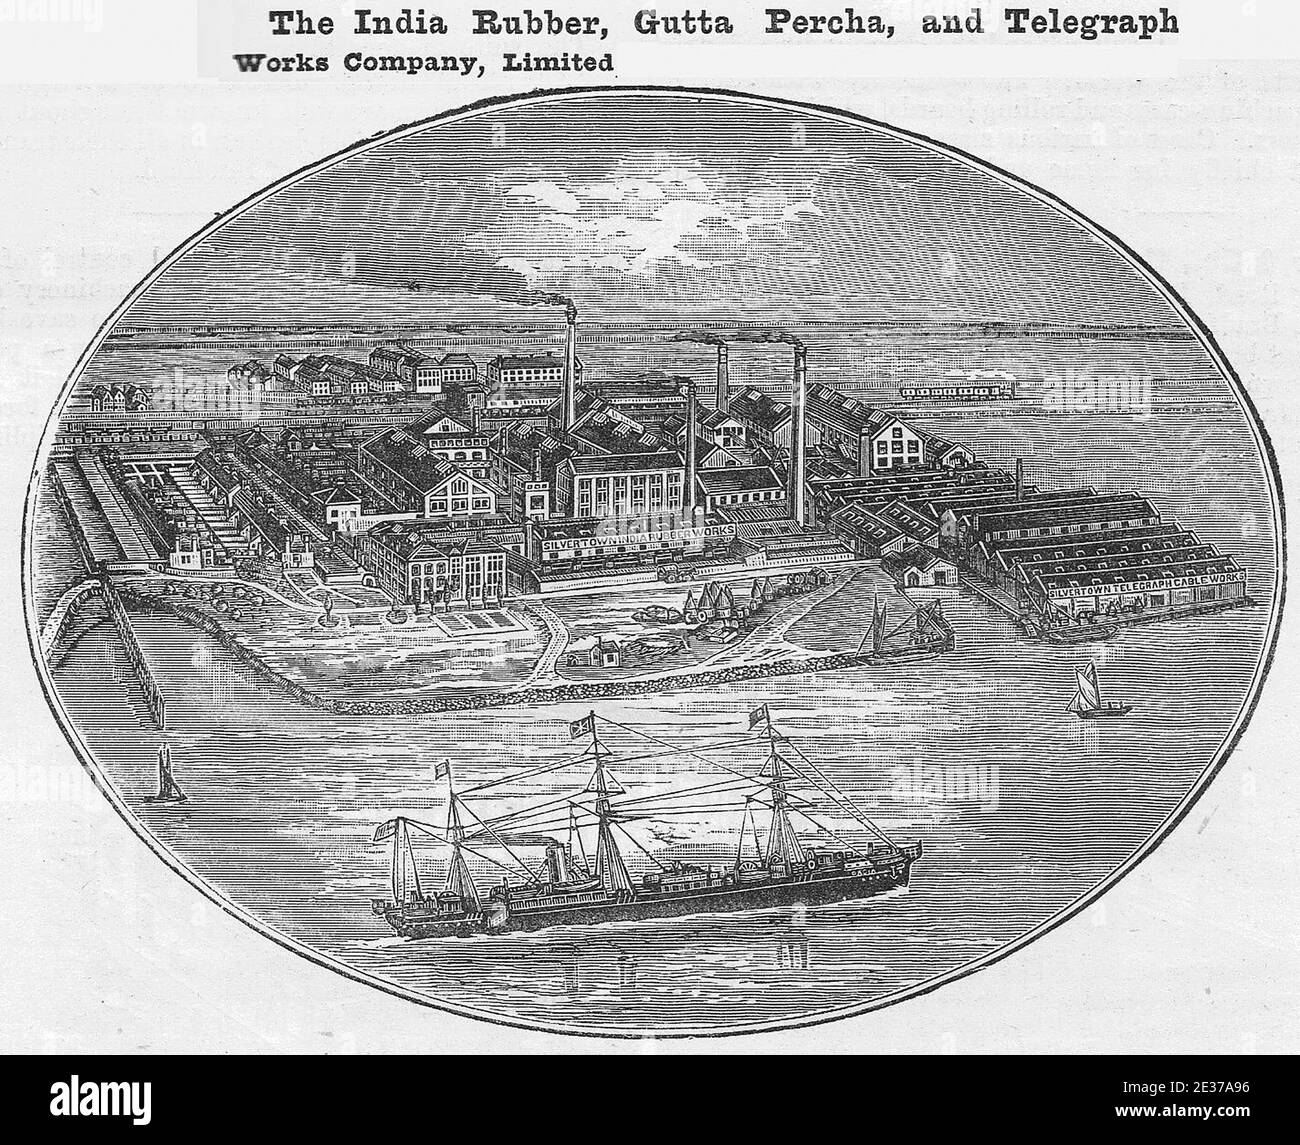 India Rubber, Gutta Percha and Telegraph Works Company,  Silvertown, East London, UK. Engraving. Stock Photo